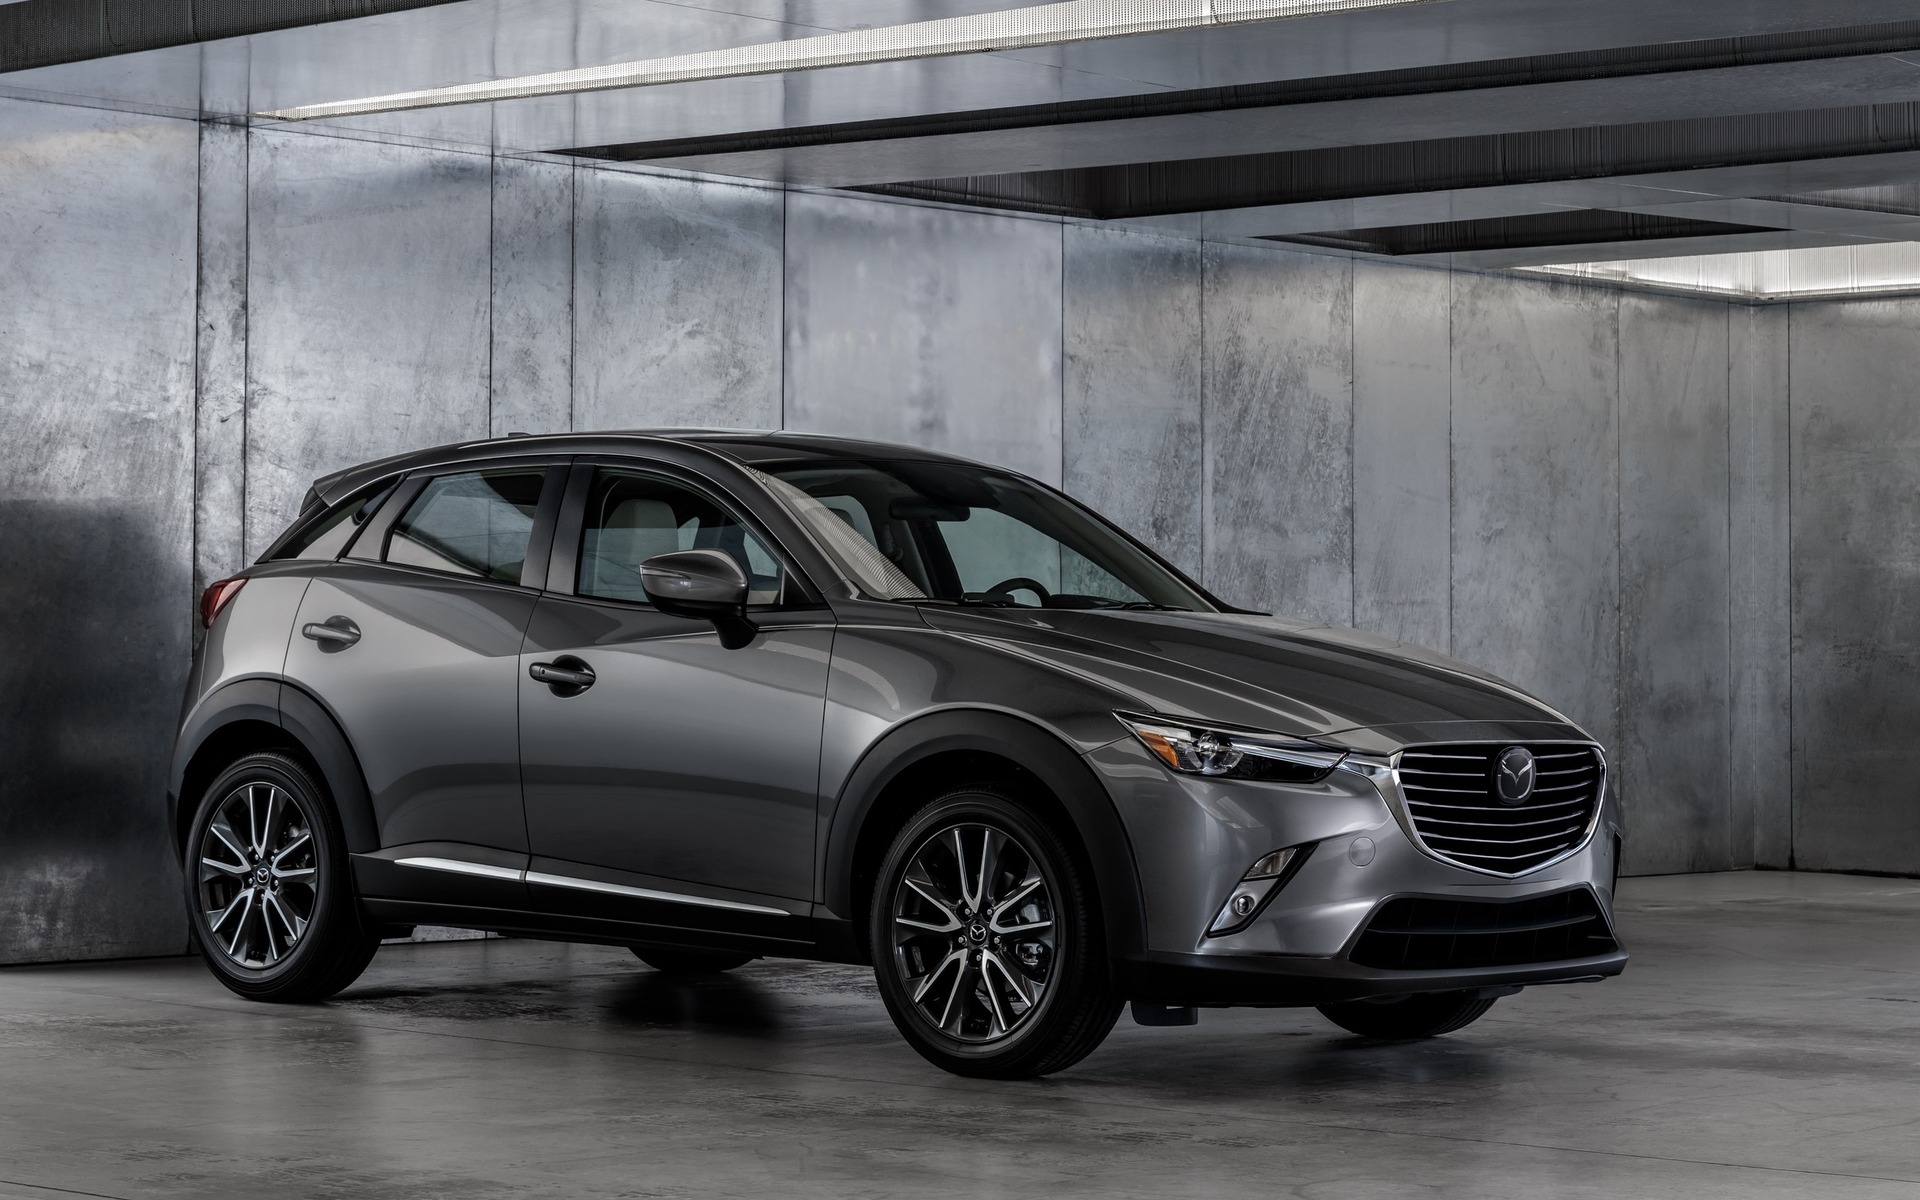 A Manual Transmission for the 2018 Mazda CX-3 - The Car Guide